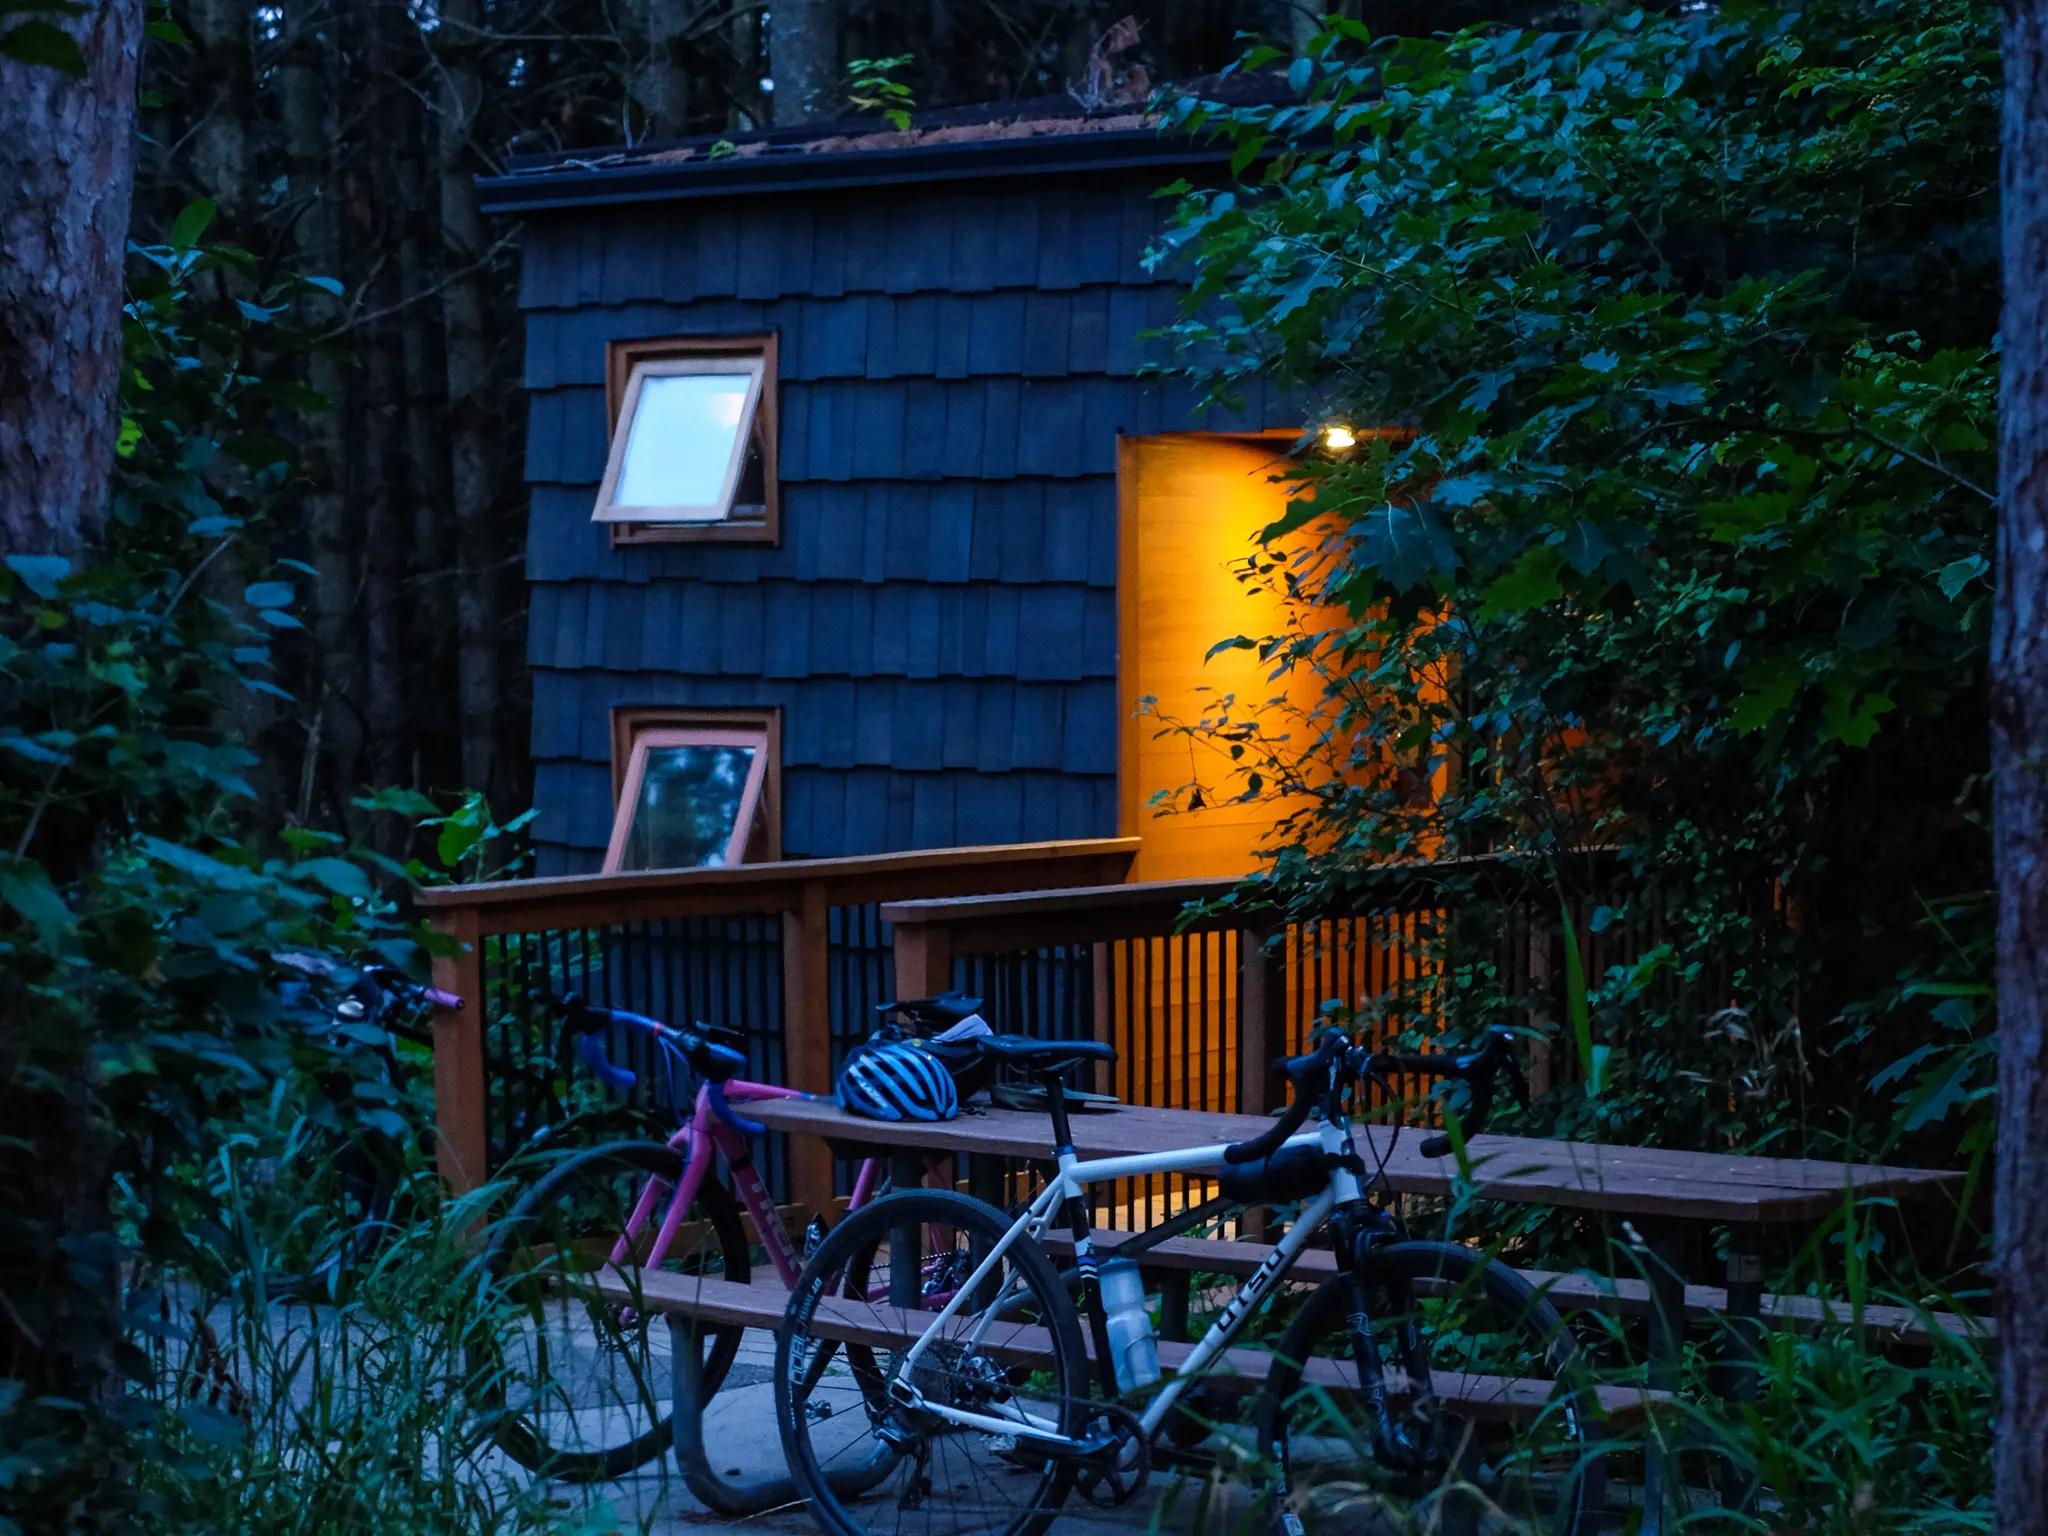 A photo of a cabin after twilight. The sun has descended and it is dark around the cabin. Two bikes lean against a picnic table outside of the cabin, and warm orange lights shine out from the cabin's doorway.